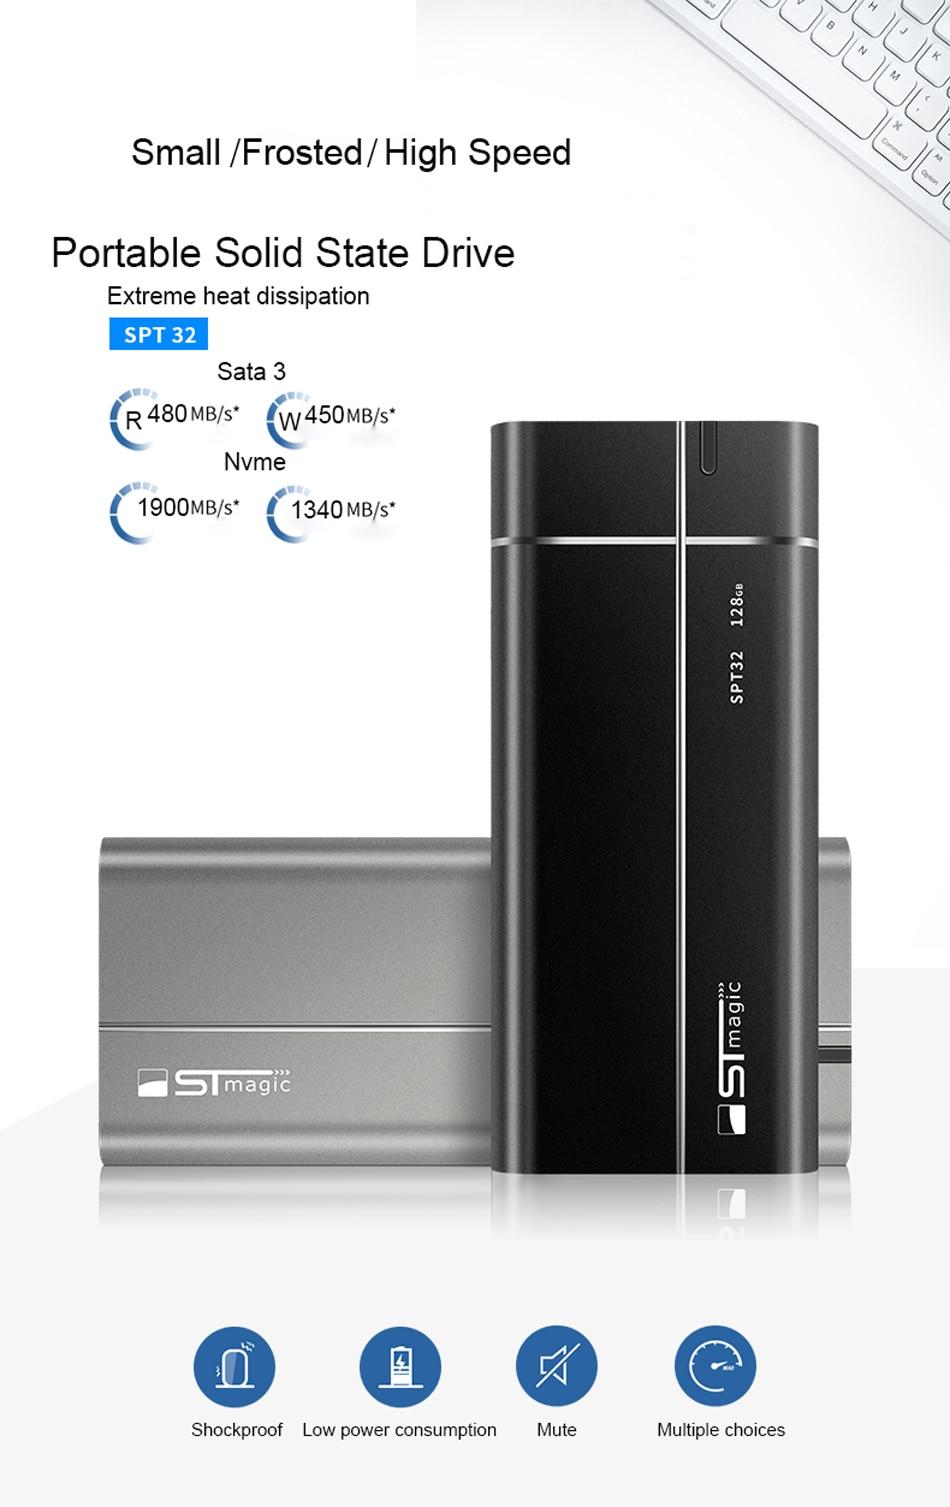 Stmagic Spt32 Fast Cooling External SSD hard drive 128GB SSD 512GB 1TB Portable SSD NVM2 Sata 3 for laptop with Type C USB 3.1